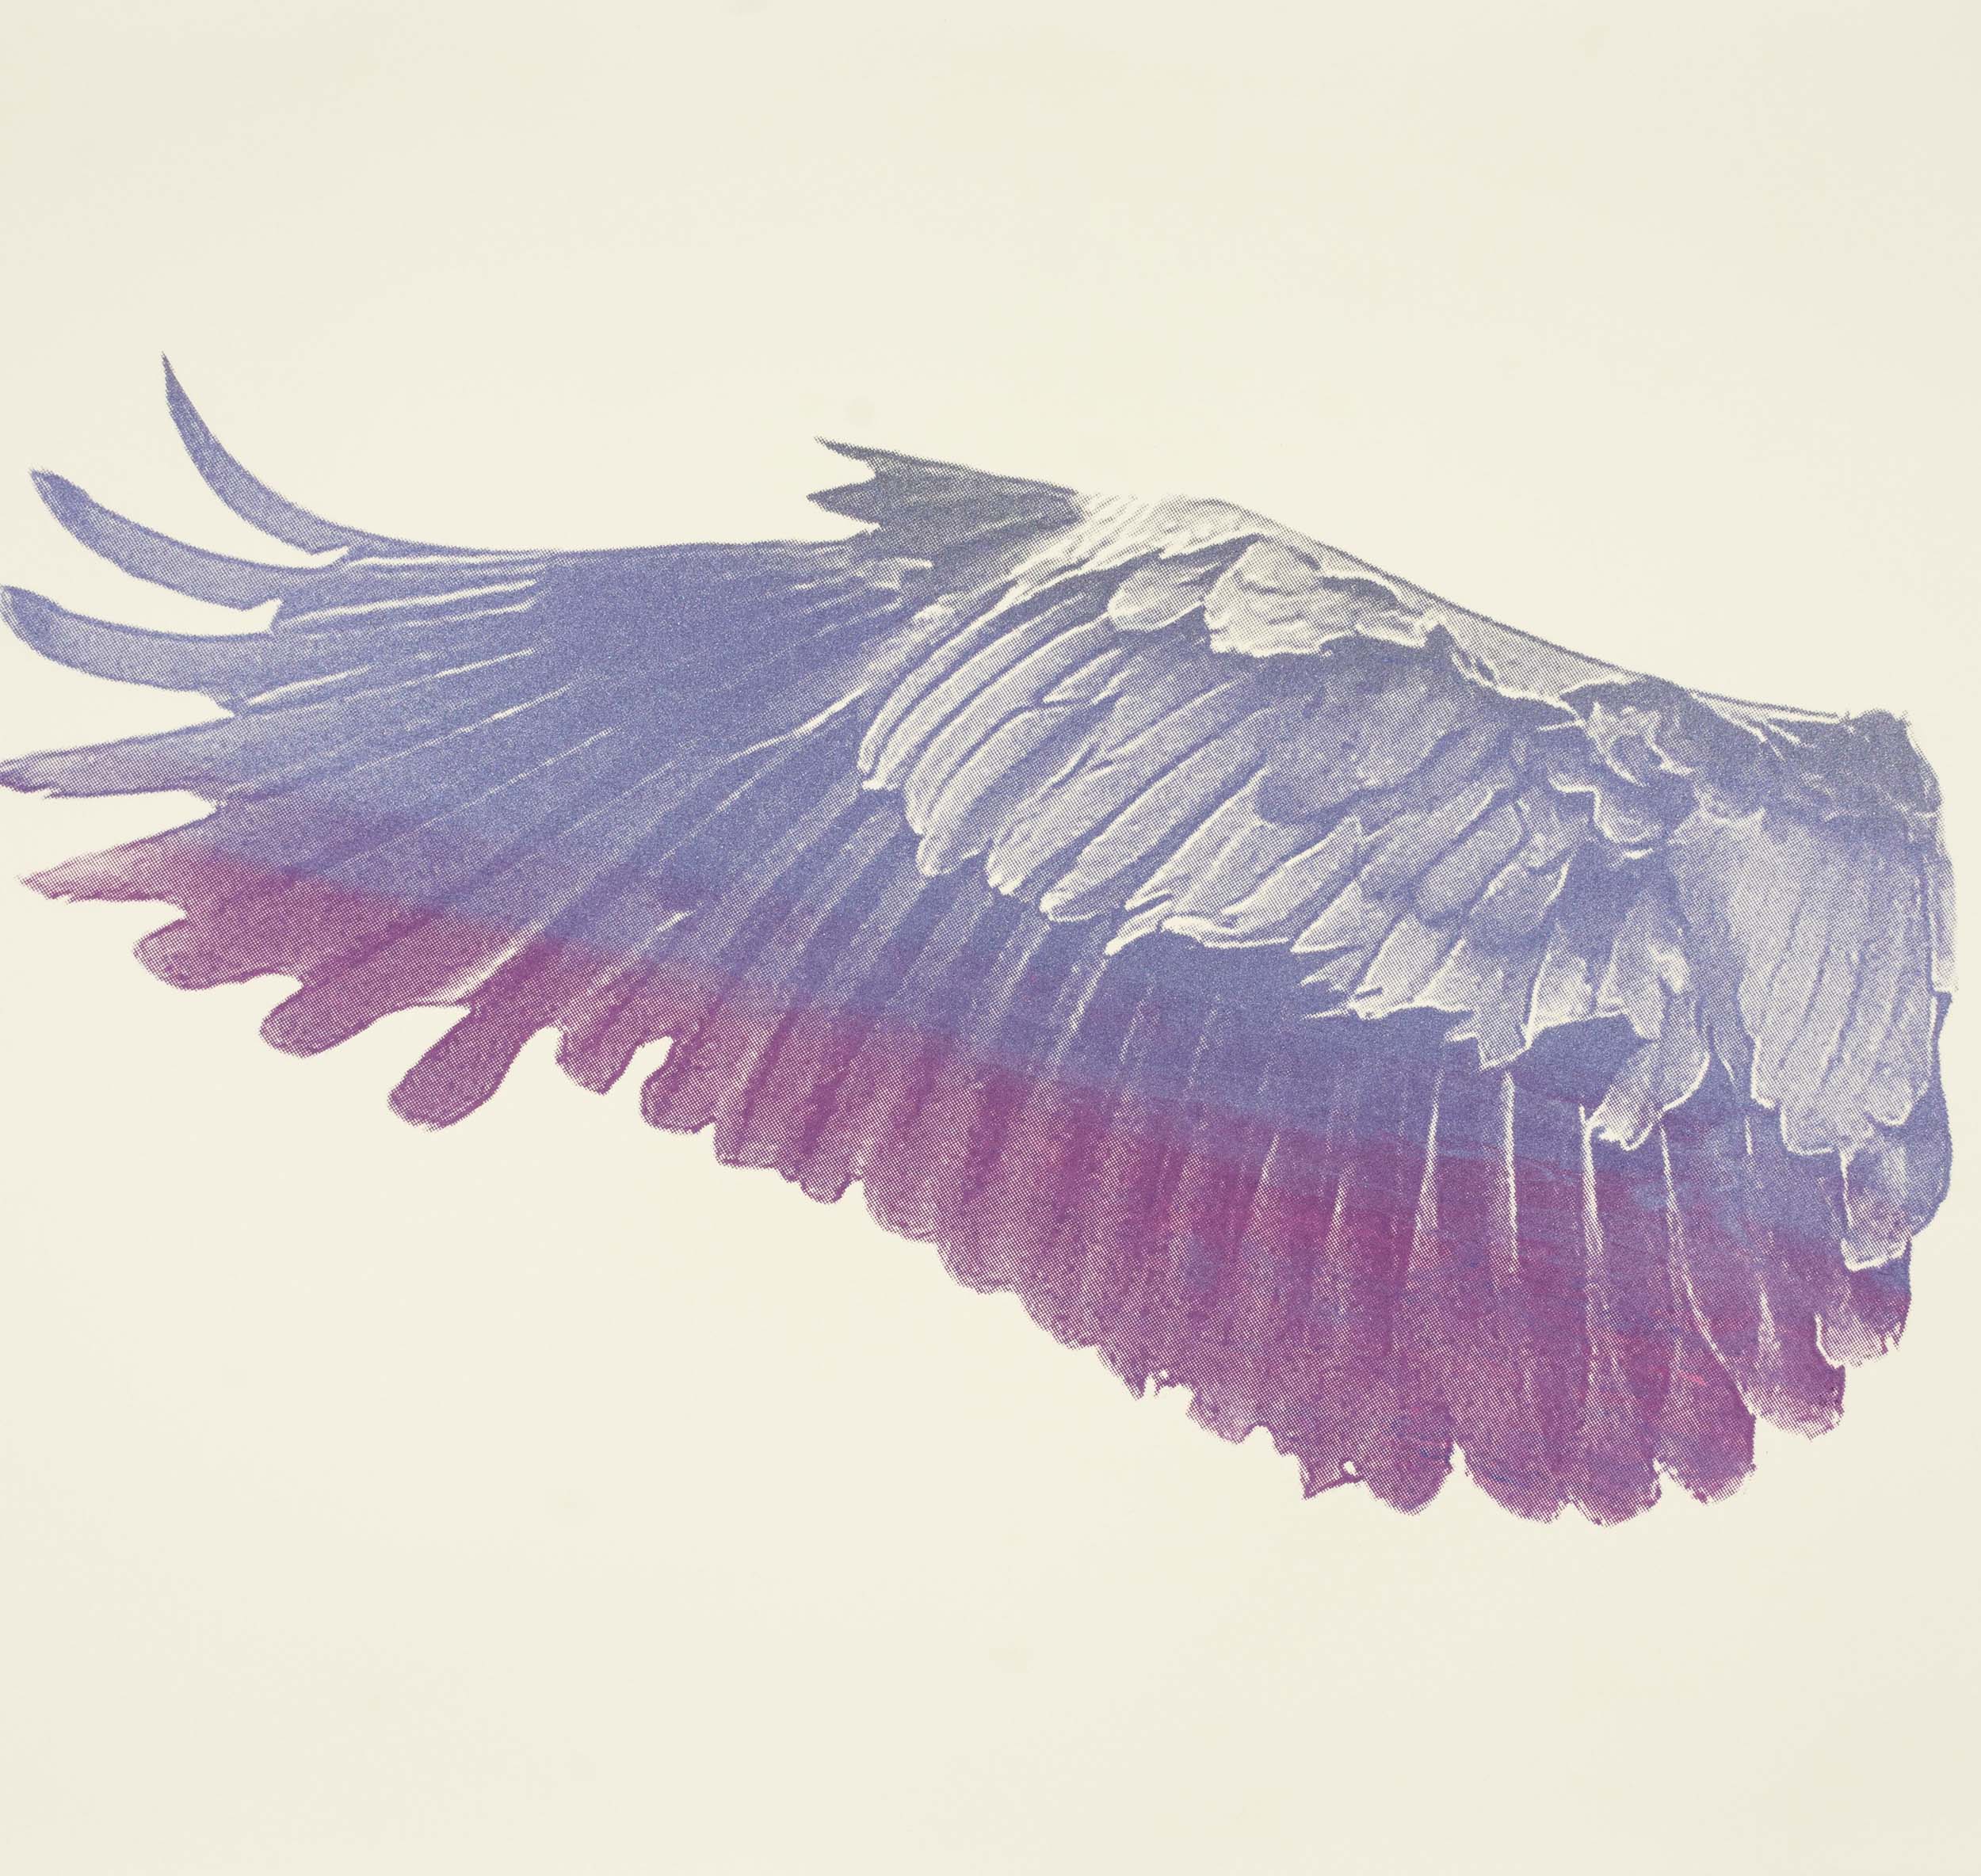 Silkscreen of a single heron's wing in purple and pink shades.